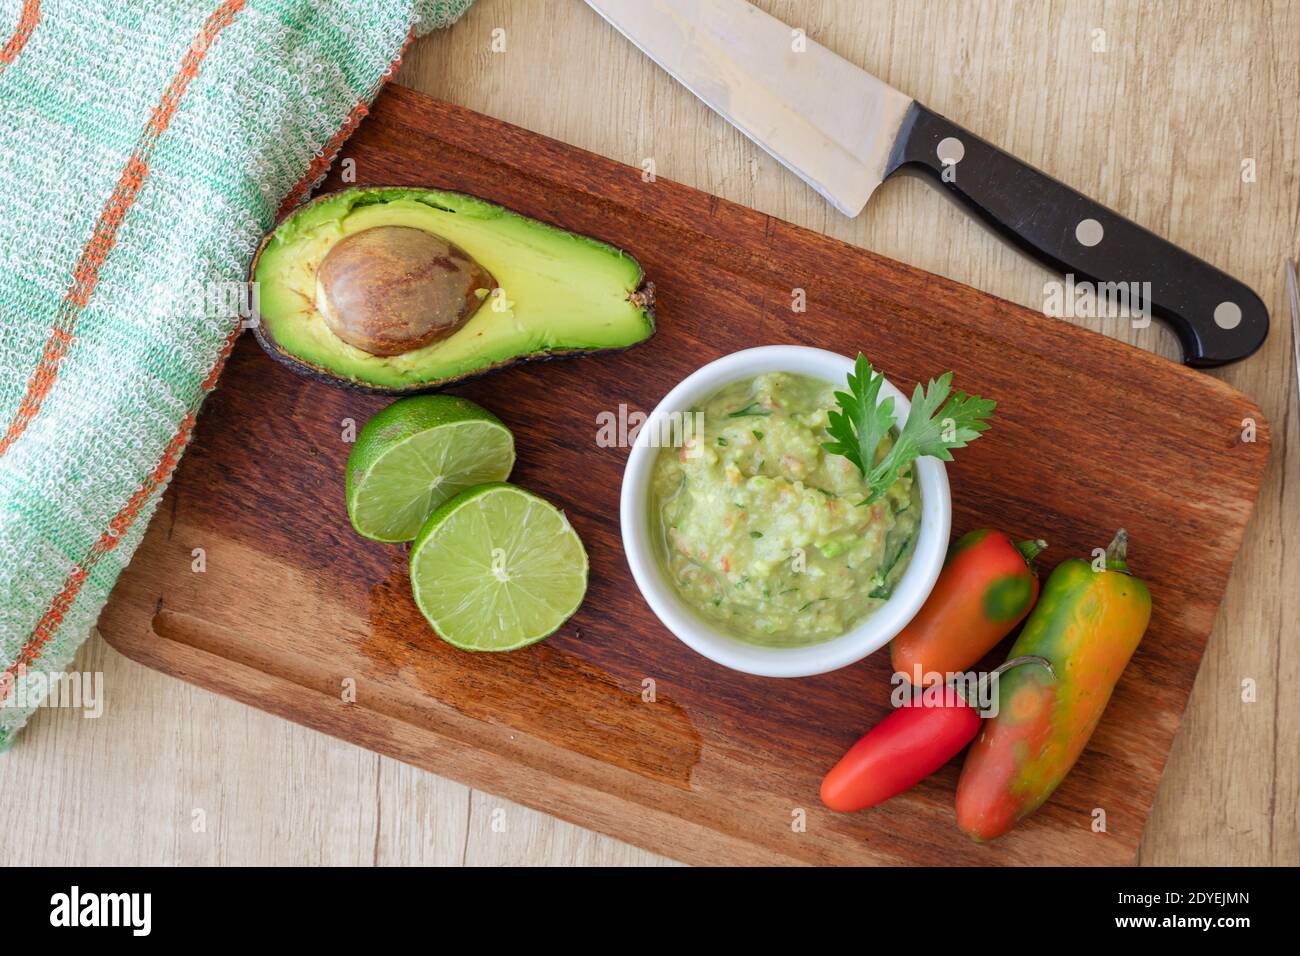 Half avocado, some hot peppers and a lime on a wooden board and bowl with the guacamole sauce Stock Photo